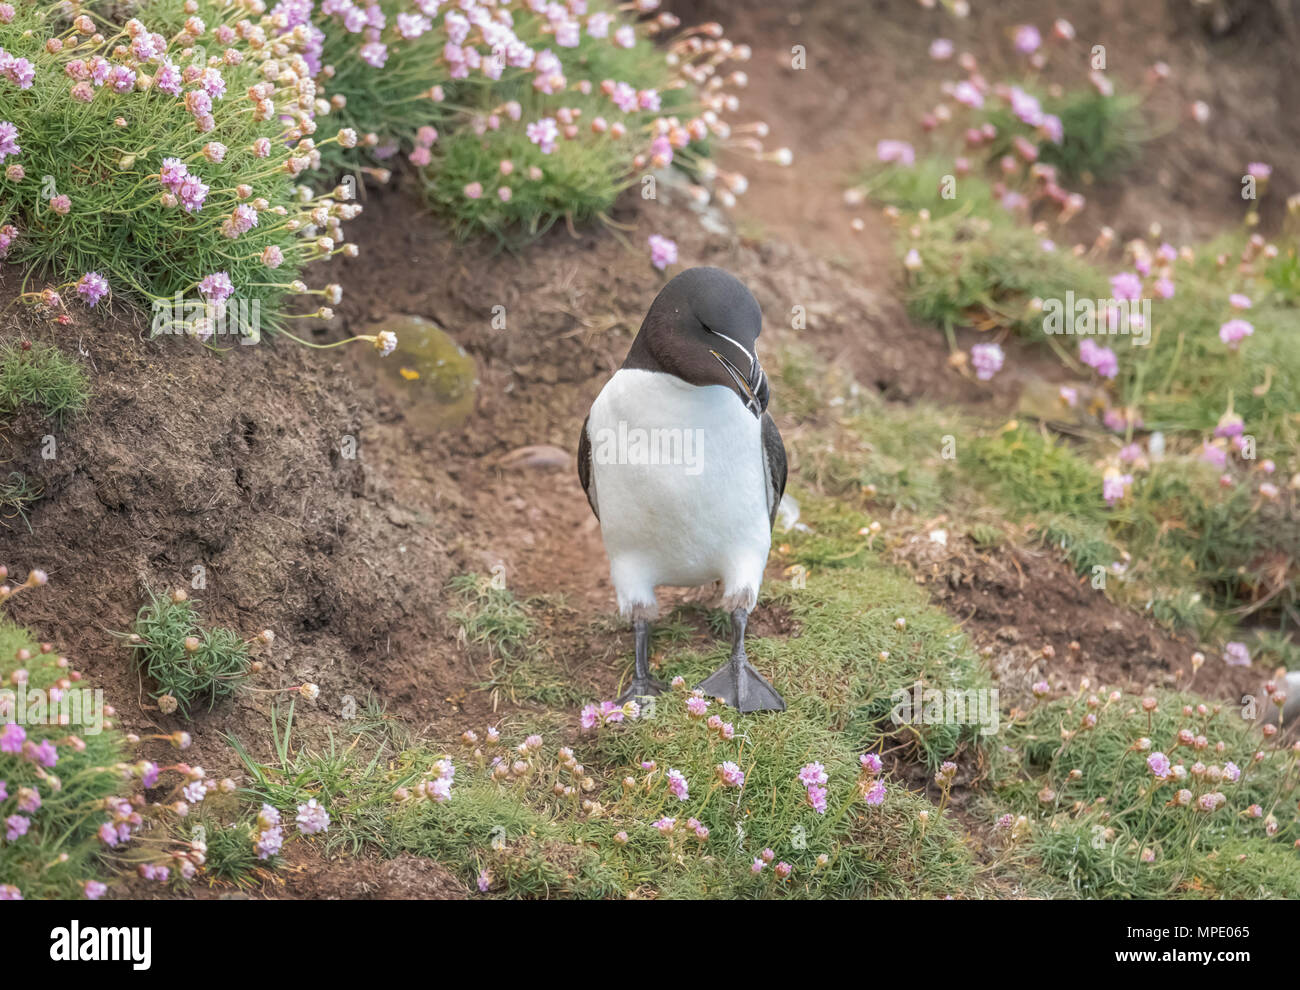 Razorbill, alca torda, standing on a cliff, surrounded by thrift flowers, in scotland in the springtime Stock Photo